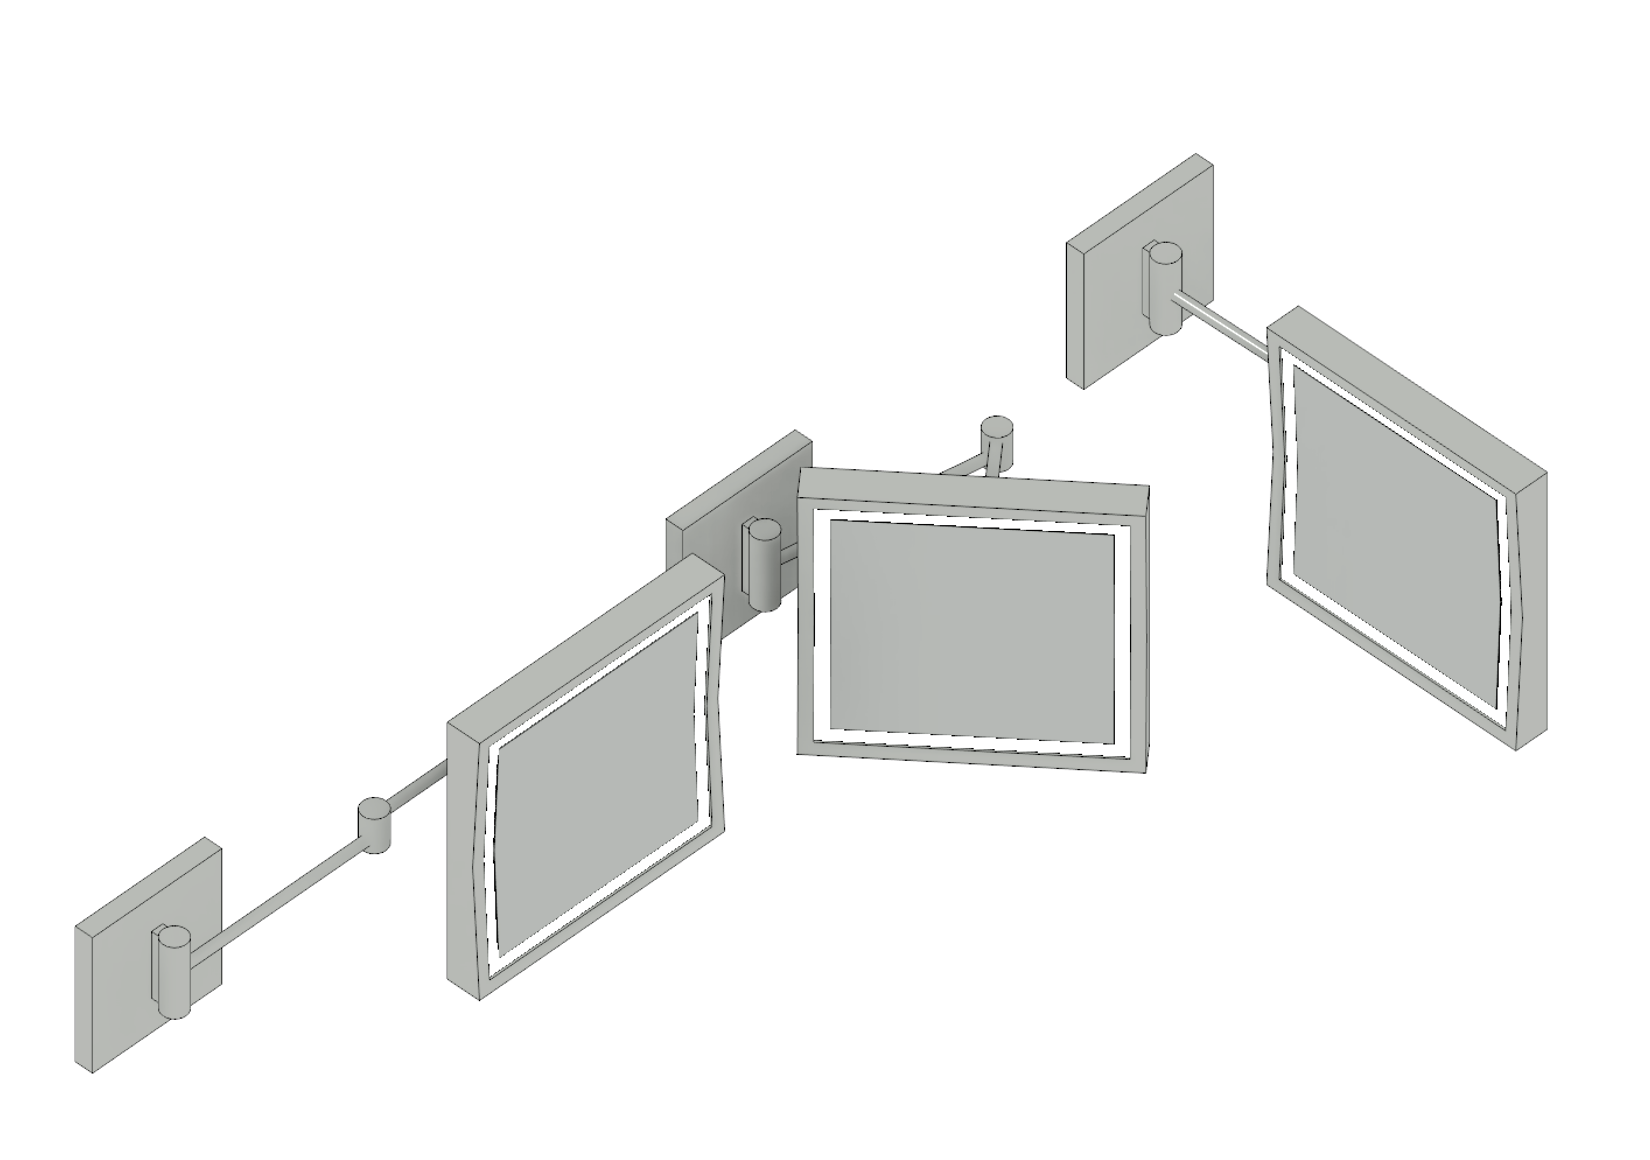 Revit 3D showing the three positions available.